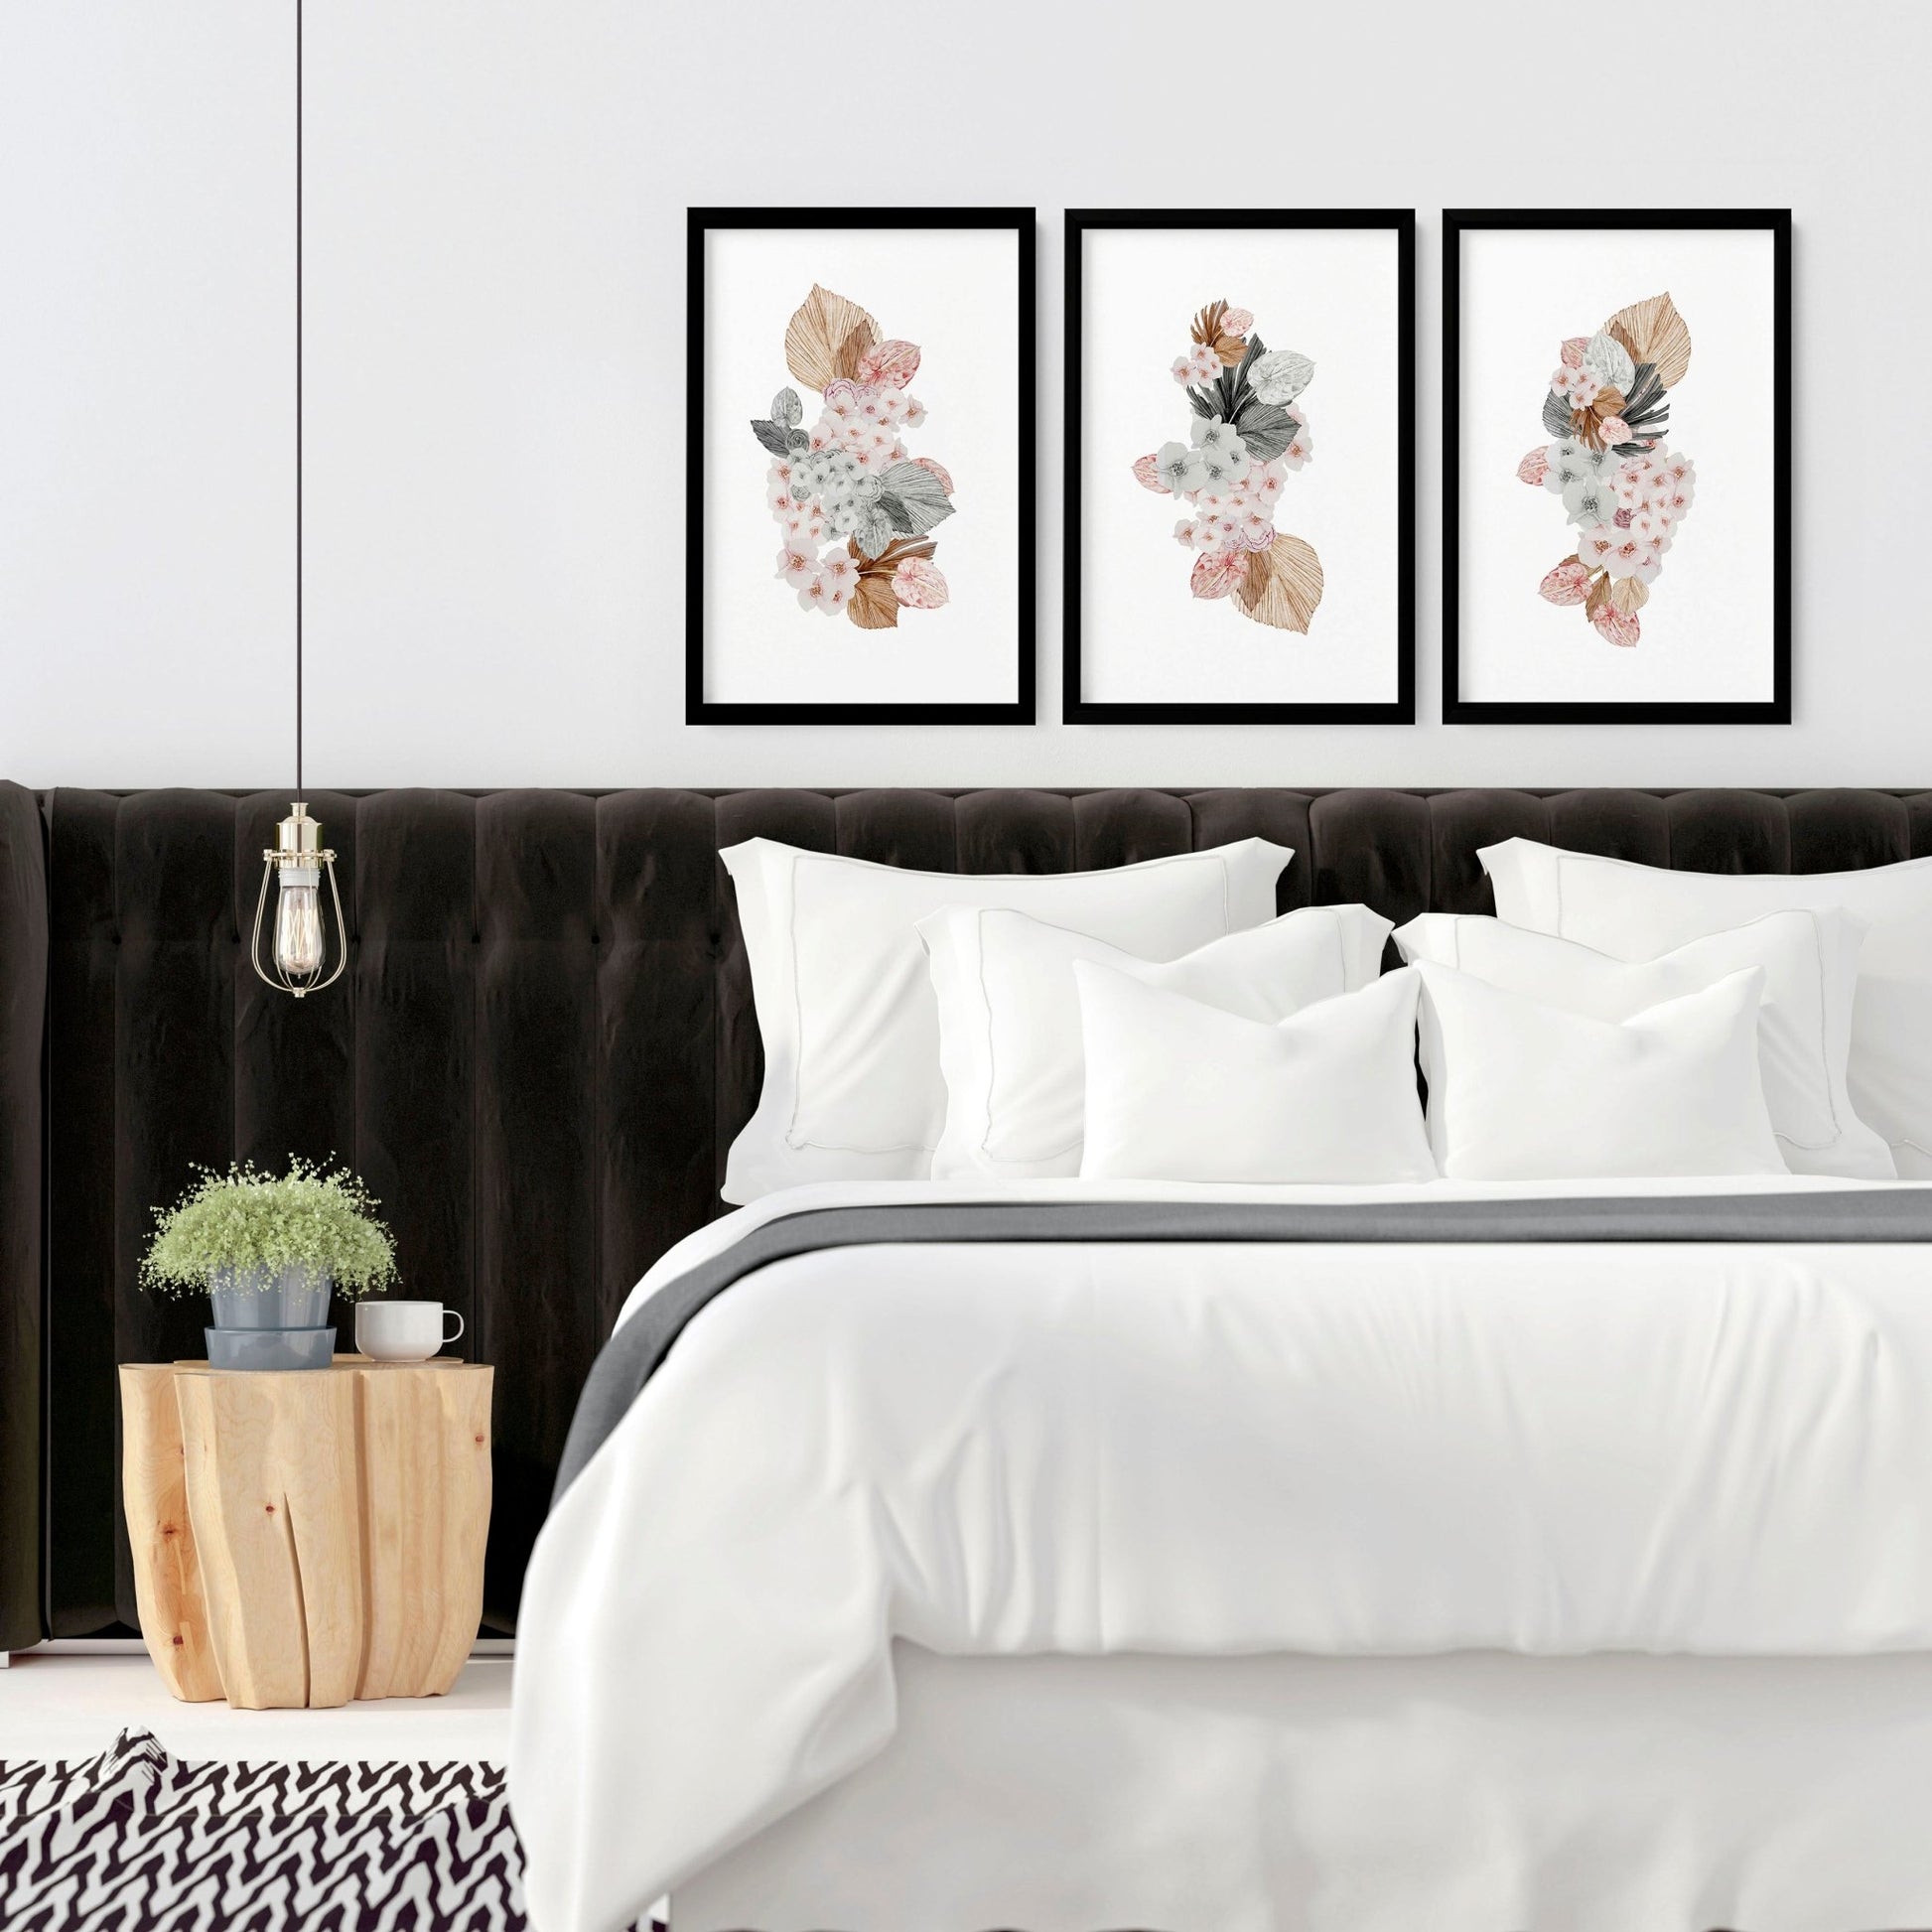 Shabby chic bedroom | set of 3 wall art prints - About Wall Art